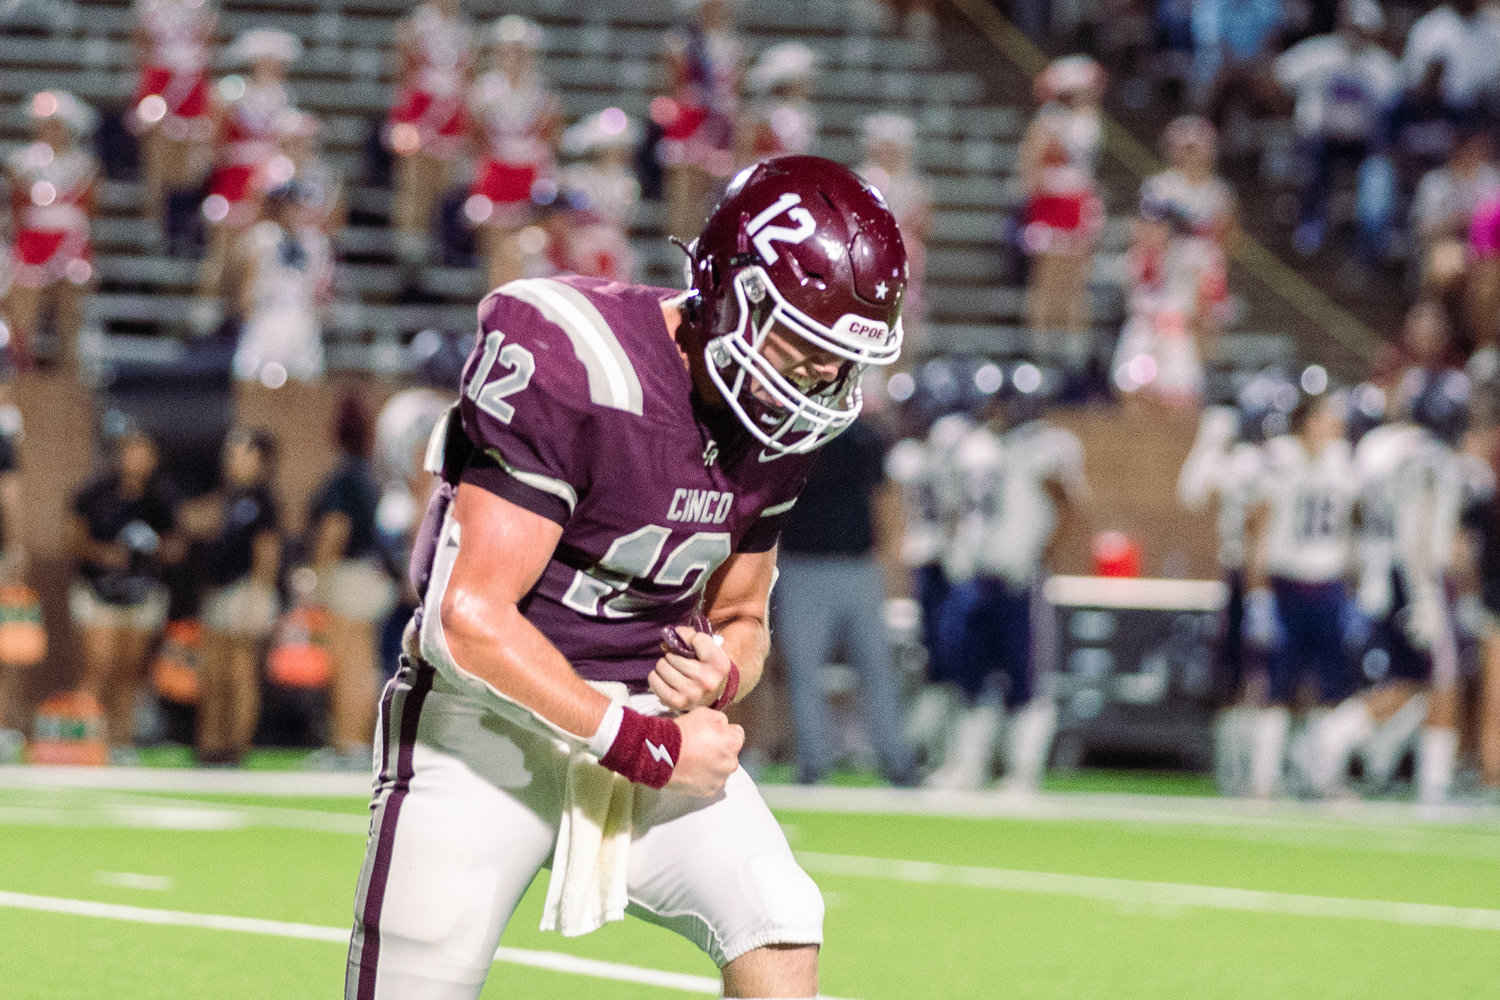 Cinco Ranch’s Gavin Rutherford celebrates after throwing for a touchdown during Friday’s game between Cinco Ranch and Tompkins at Rhodes Stadium.